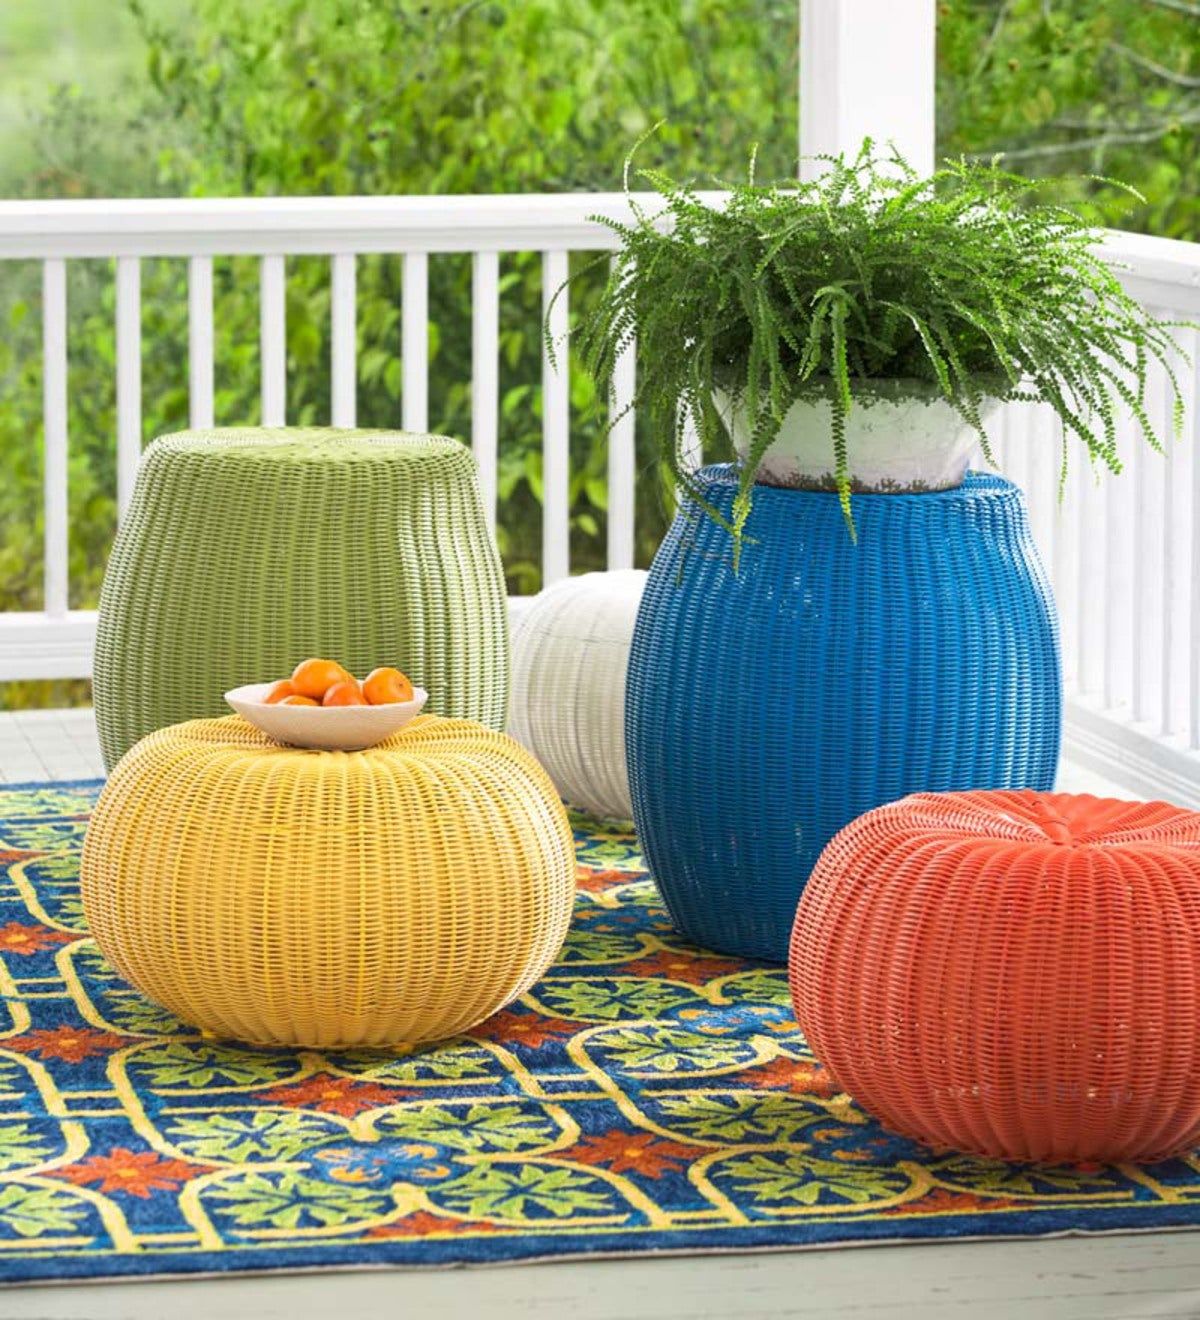 Sale! Large Tangier Wicker Outdoor Ottoman Pouf – Red | Plowhearth Intended For Woven Pouf Ottomans (Gallery 20 of 20)